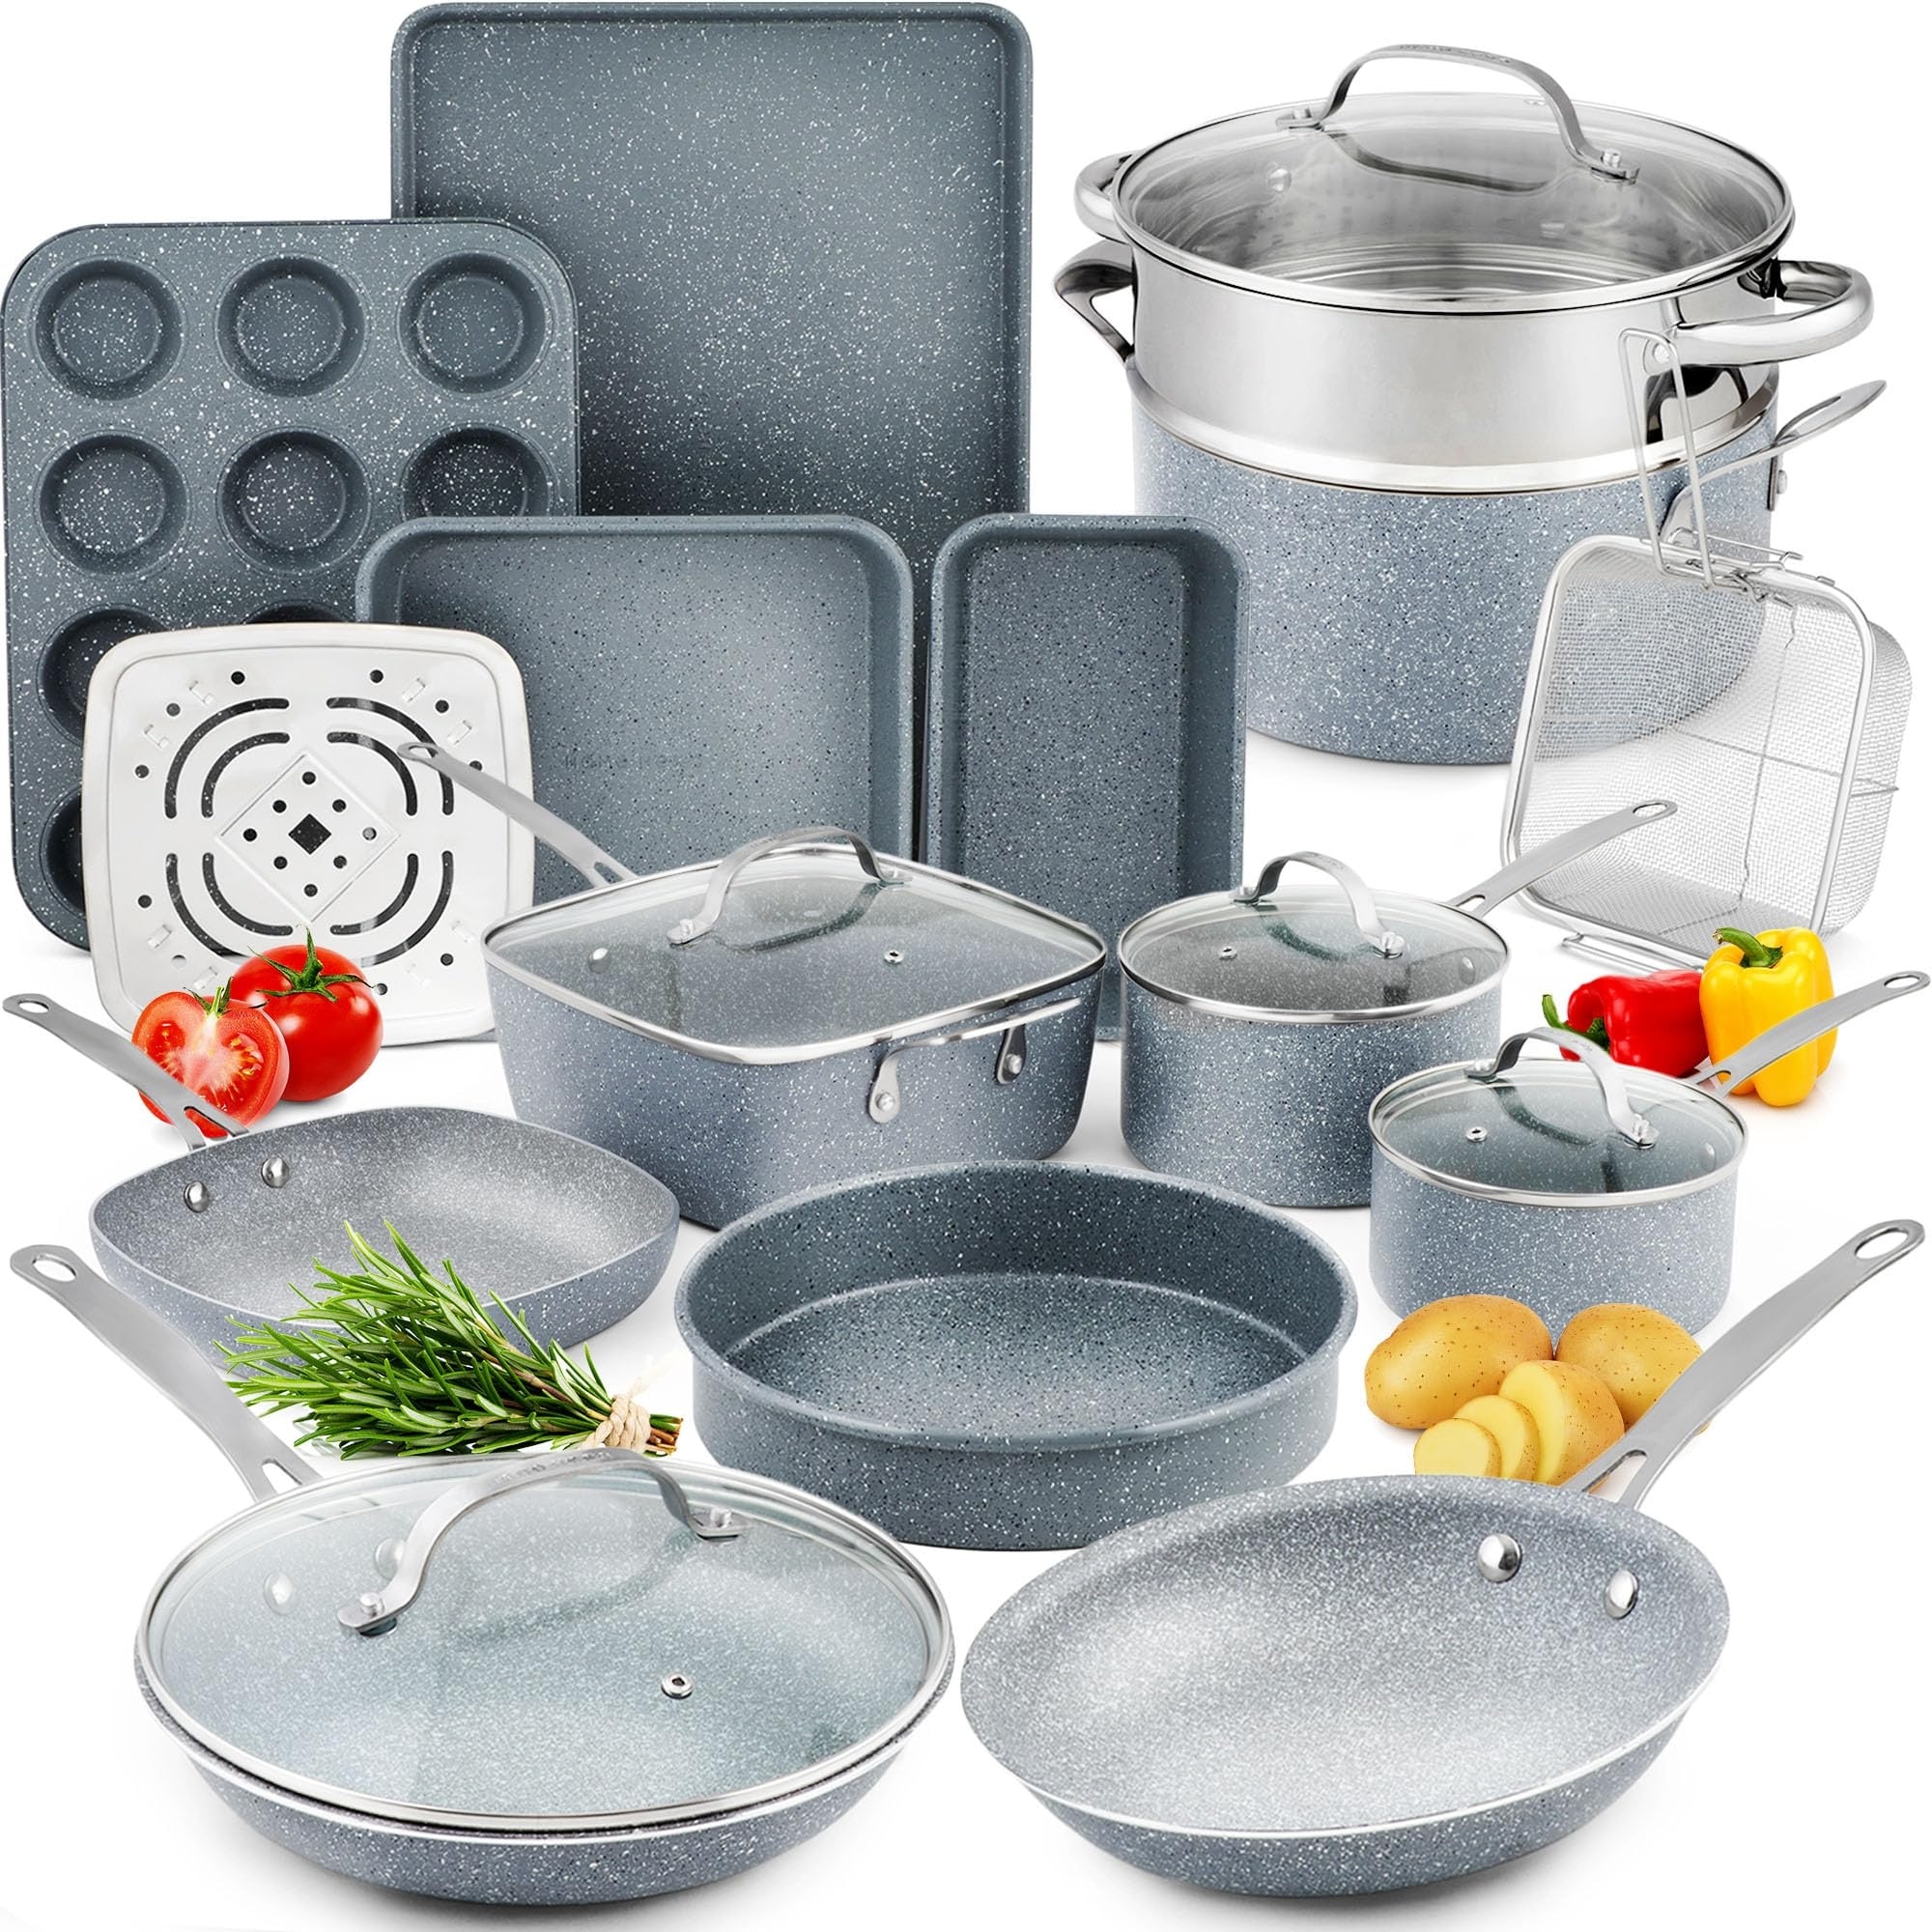 https://ak1.ostkcdn.com/images/products/is/images/direct/0e3f49adcbc99aac70f13ce4be4c6e87be2cf0f7/20-Pcs-Pots-and-Pans-Set-Non-Stick---All-In-One-Induction-Granite-Cookware-Set-%2B-Bakeware-Set---Non-Toxic%2C-PFOA-Free.jpg